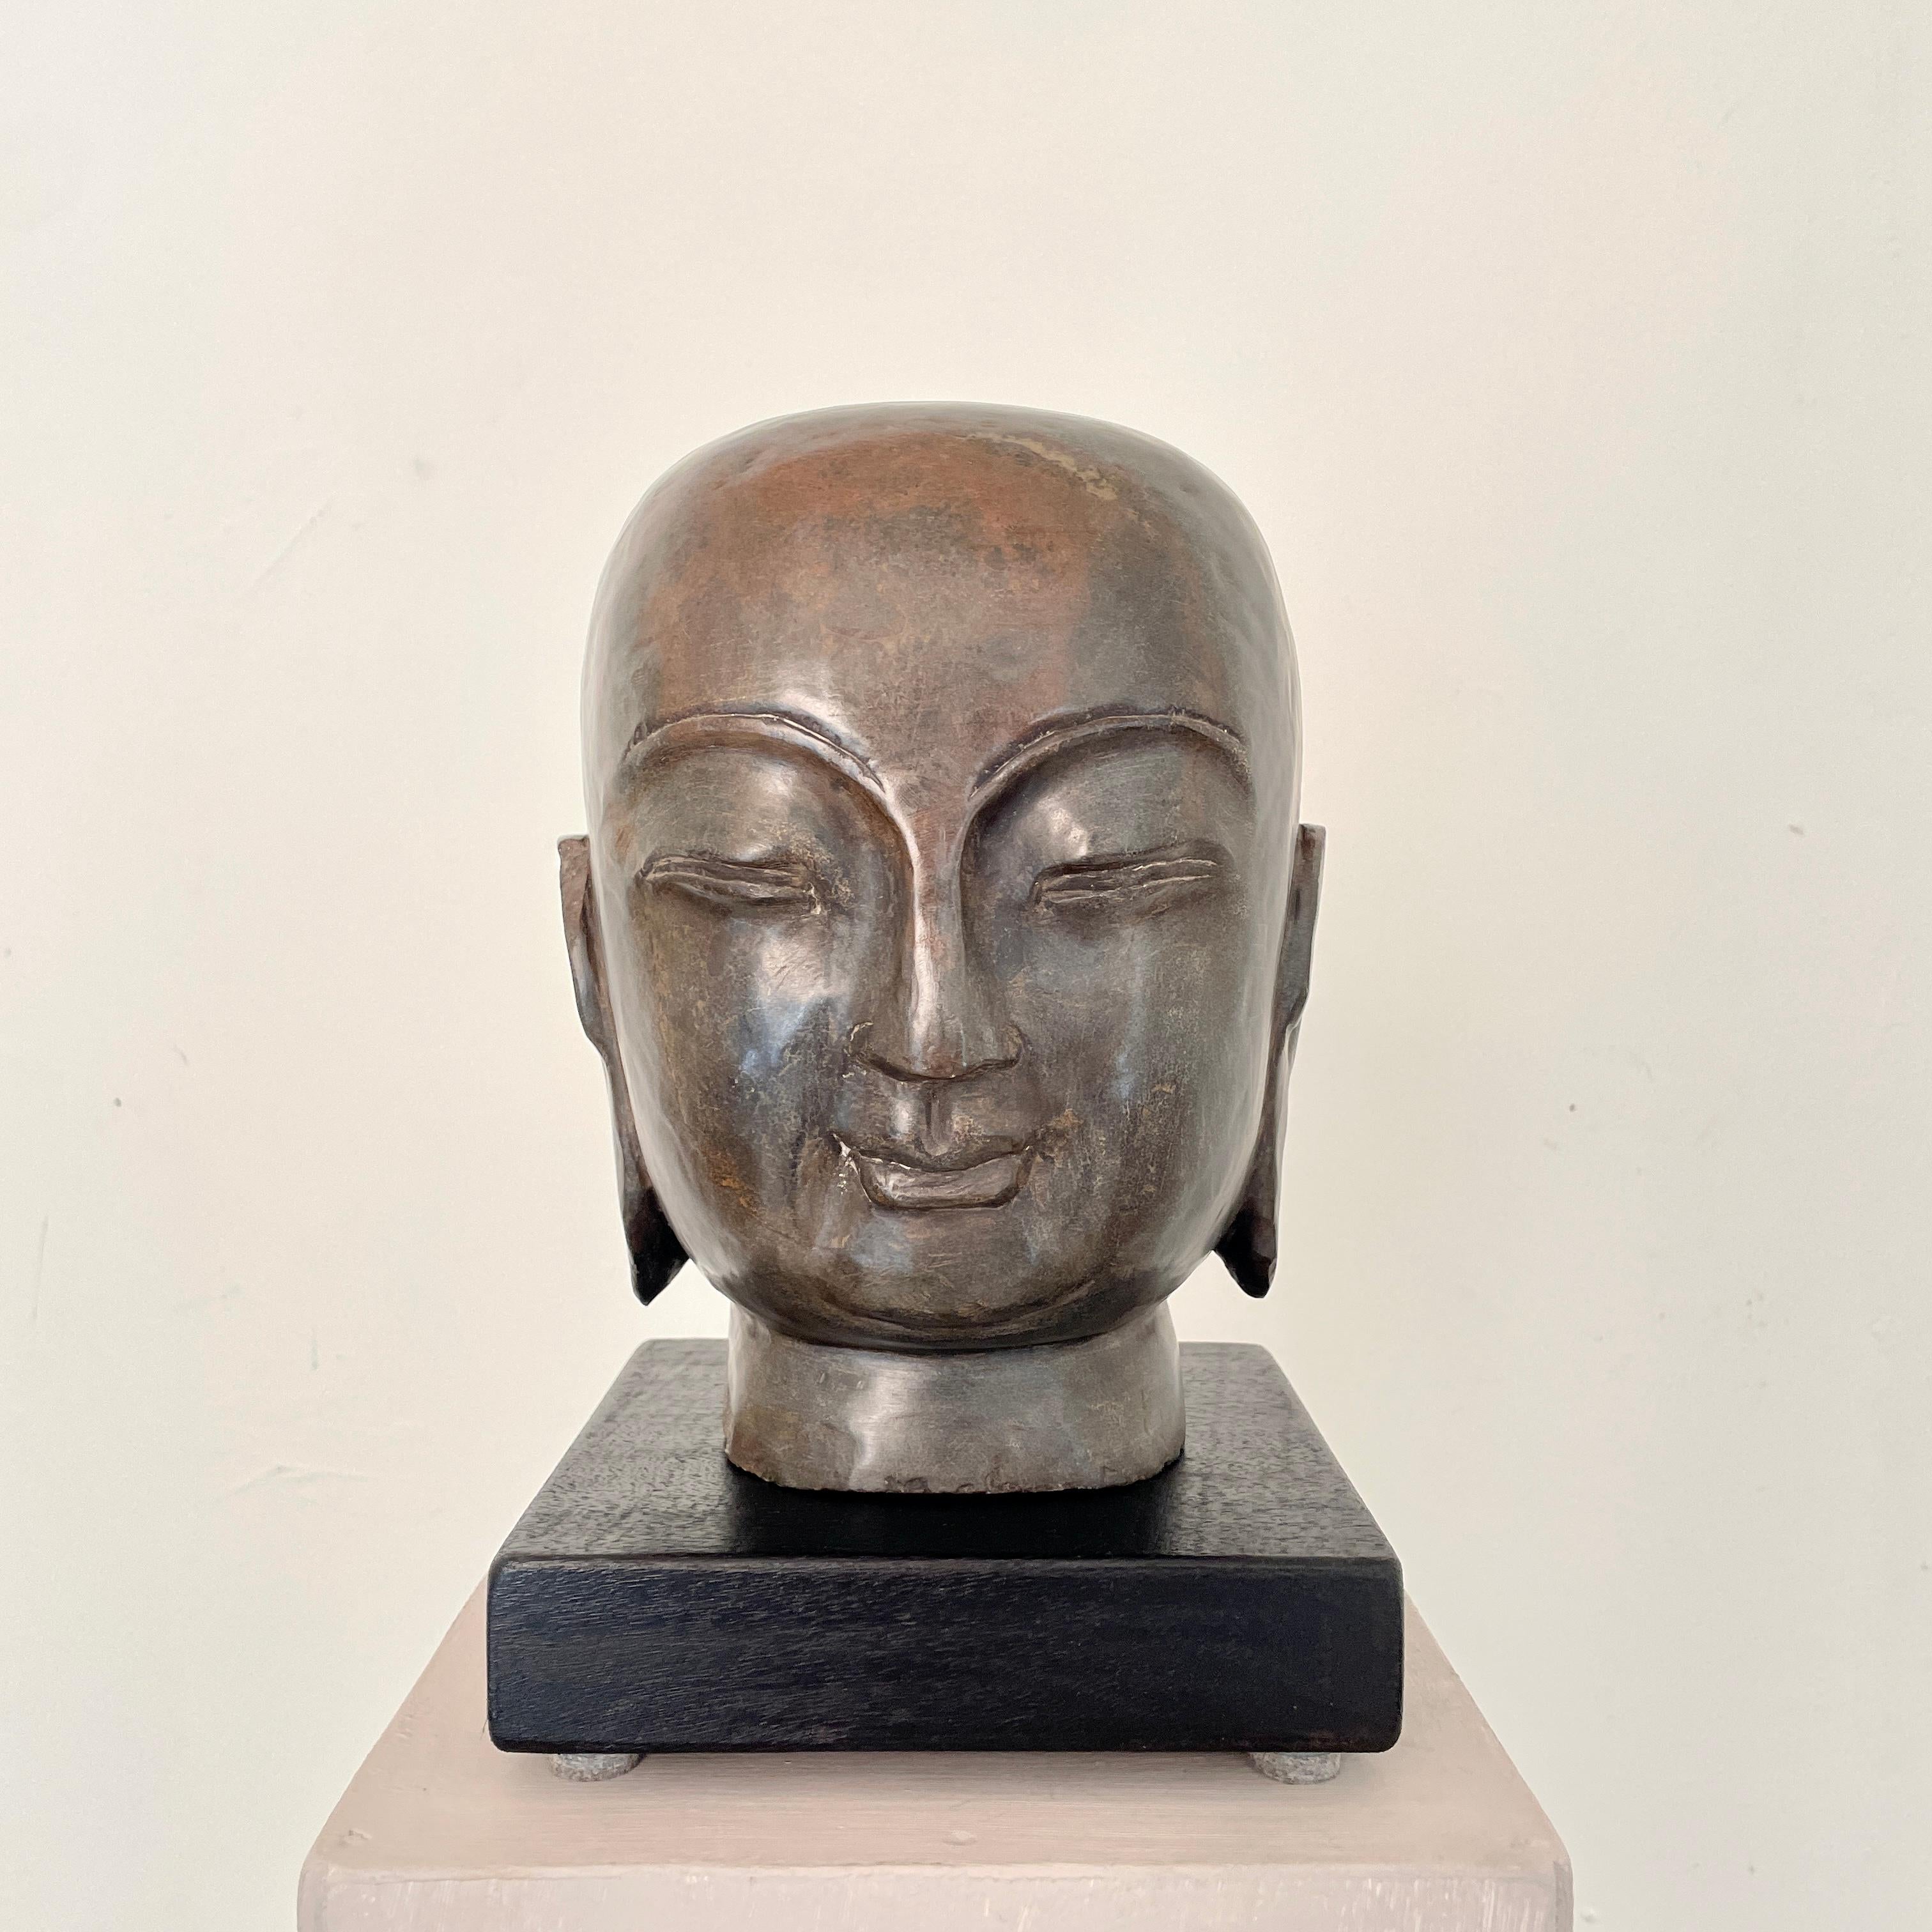 Primitive Early 20th Century Chinese Buddha Carved Stone Head, around 1920